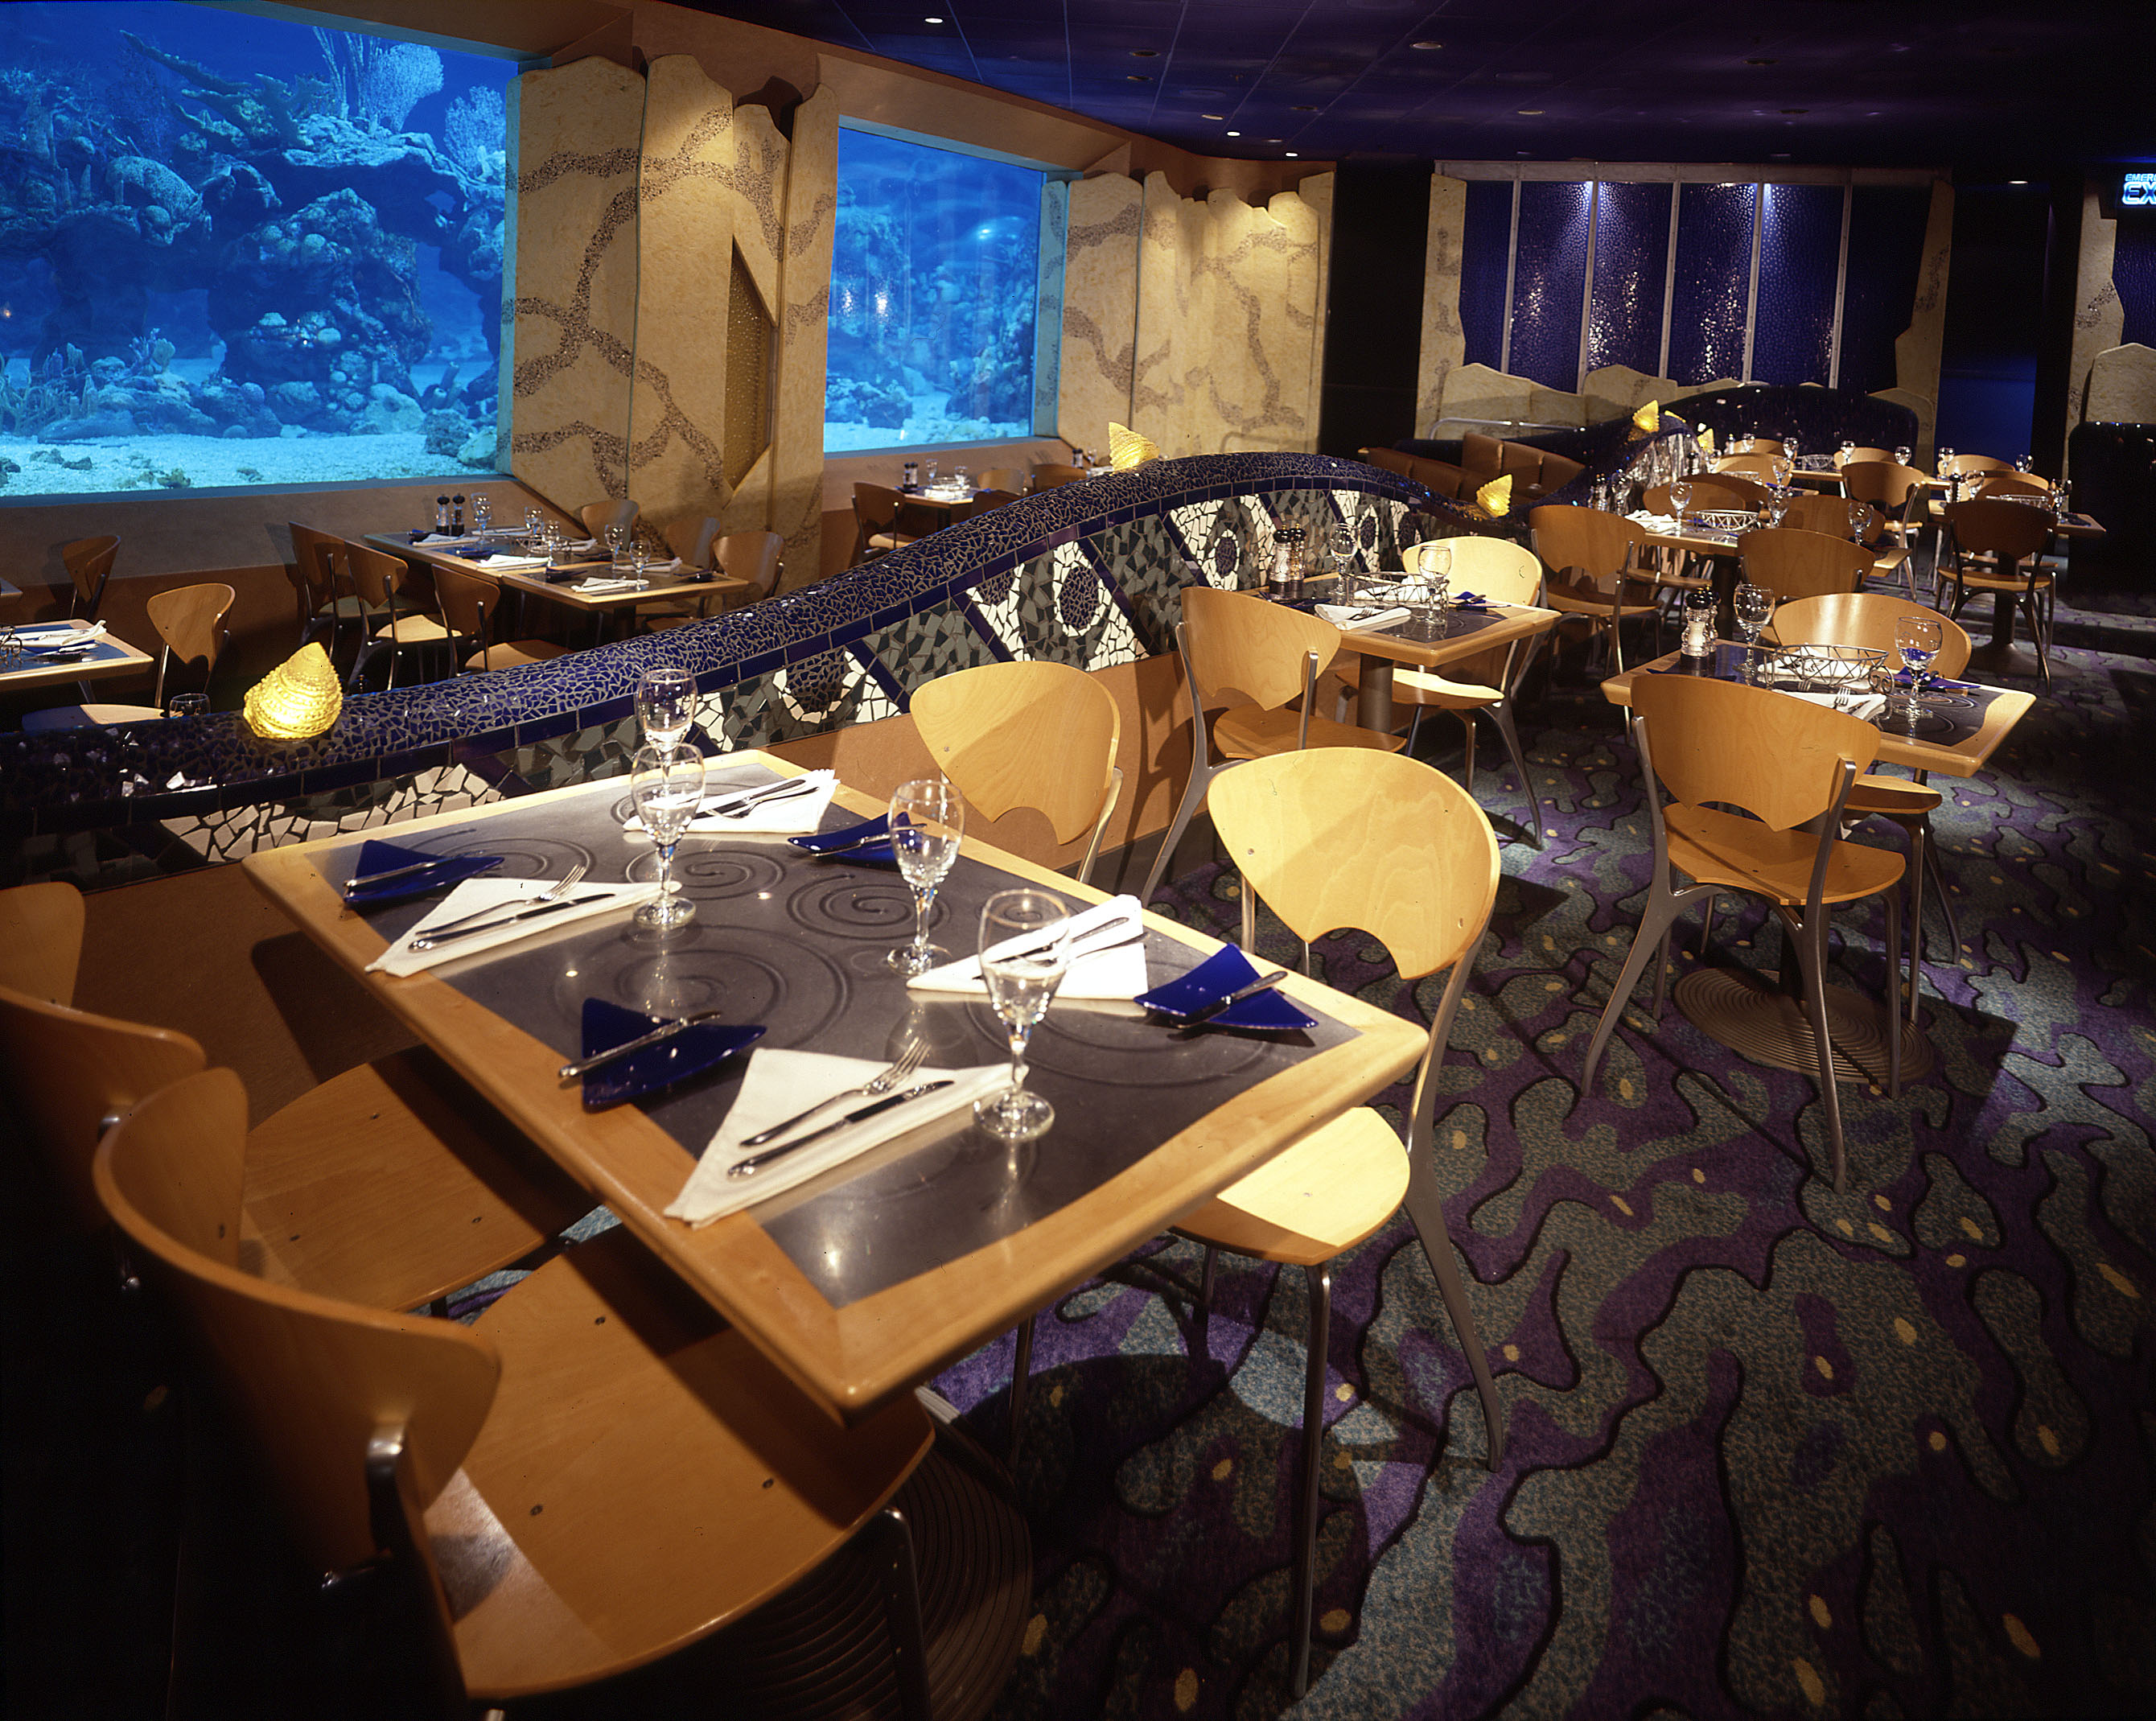 Seven New Dishes Added to the Menu at Coral Reef in Disney’s Epcot